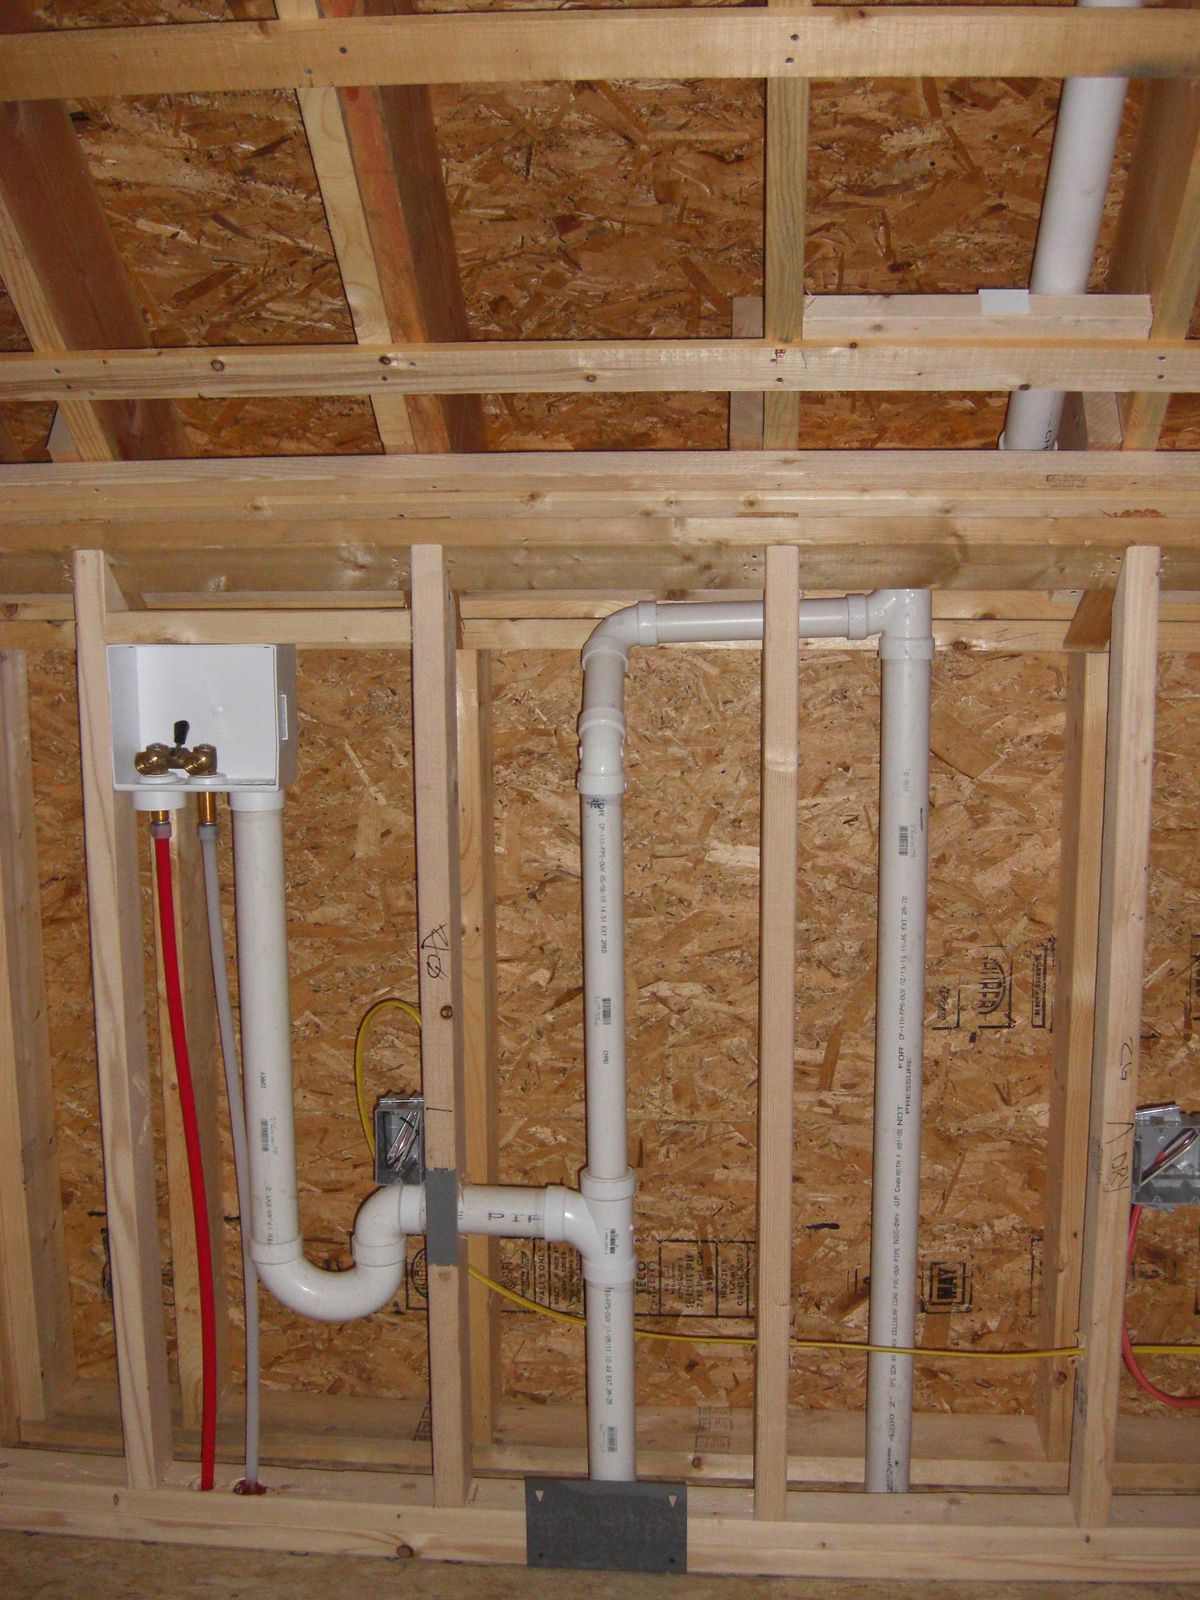 Most of the pipes you see in this photo are plumbing vent pipes. (Tribune Content Service)